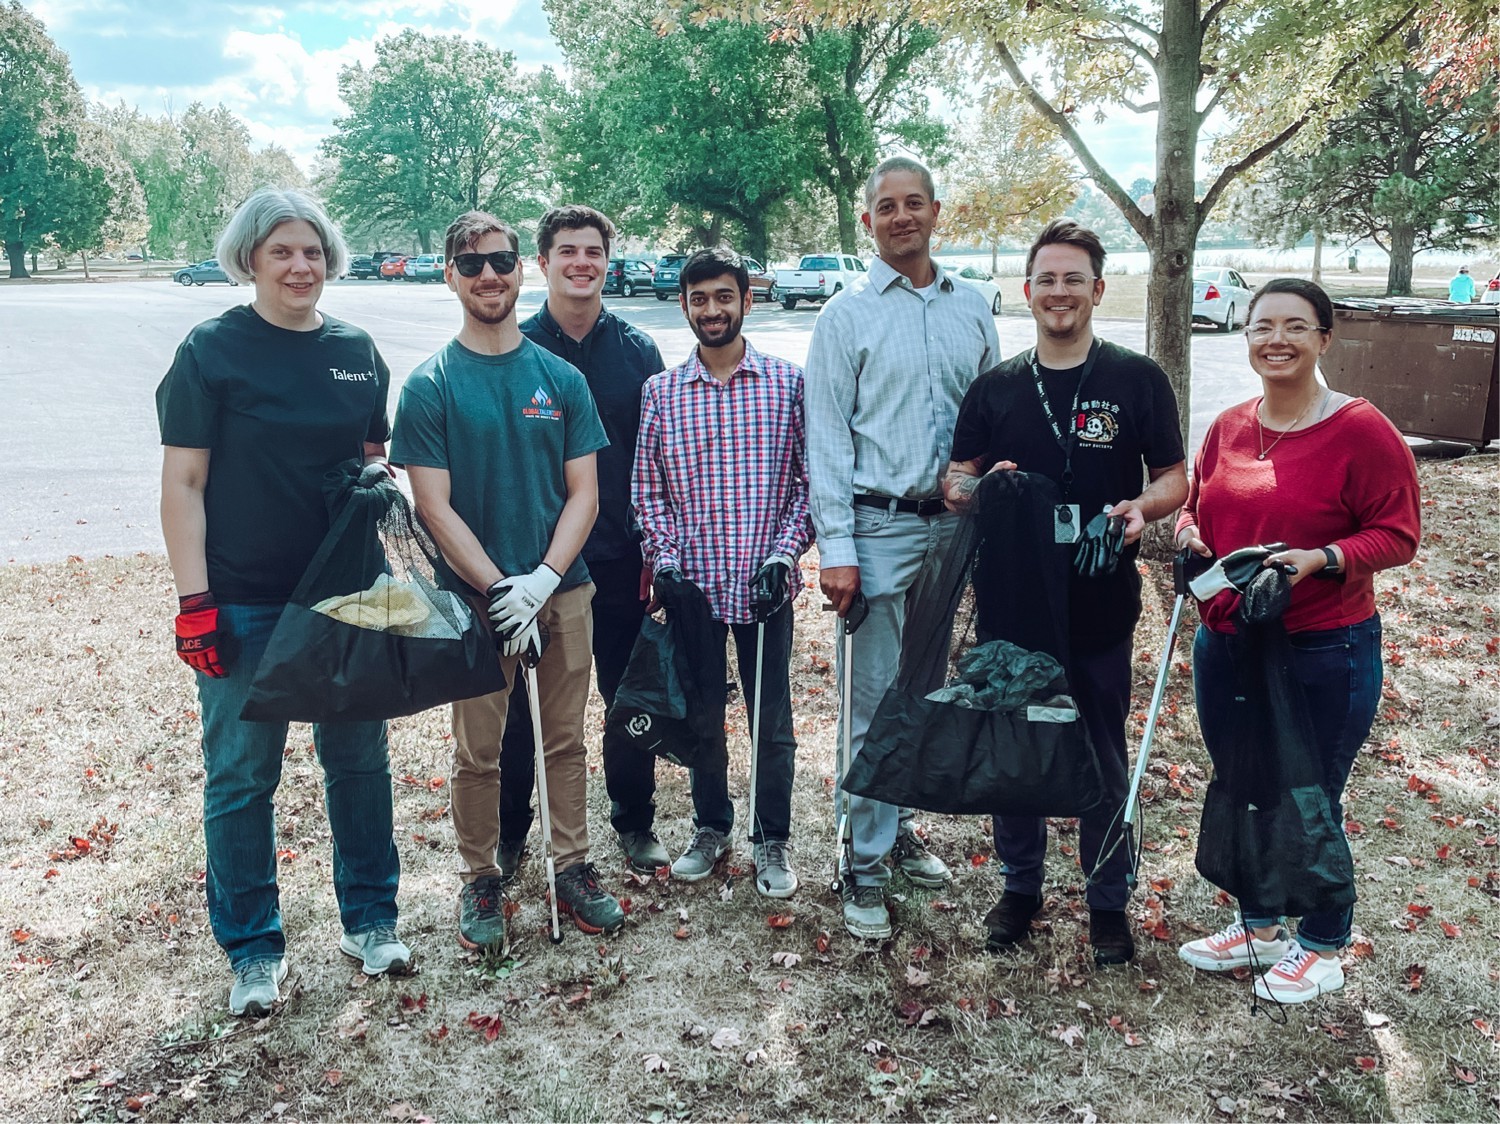 Talent Plus Sustainability Team organizes lunchtime clean up at nearby park